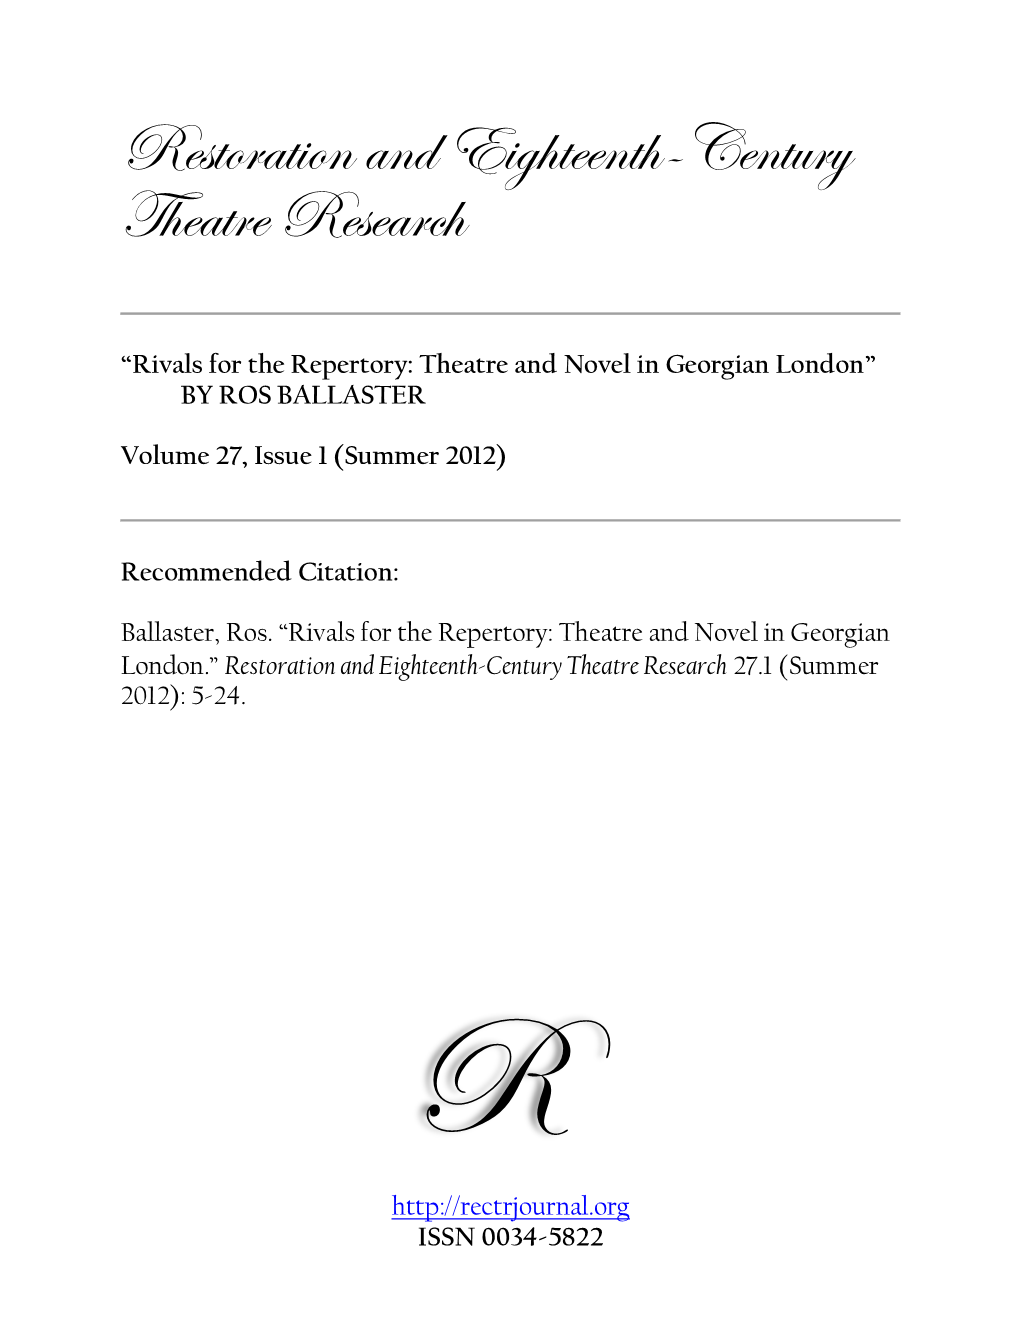 Rivals for the Repertory: Theatre and Novel in Georgian London” by ROS BALLASTER